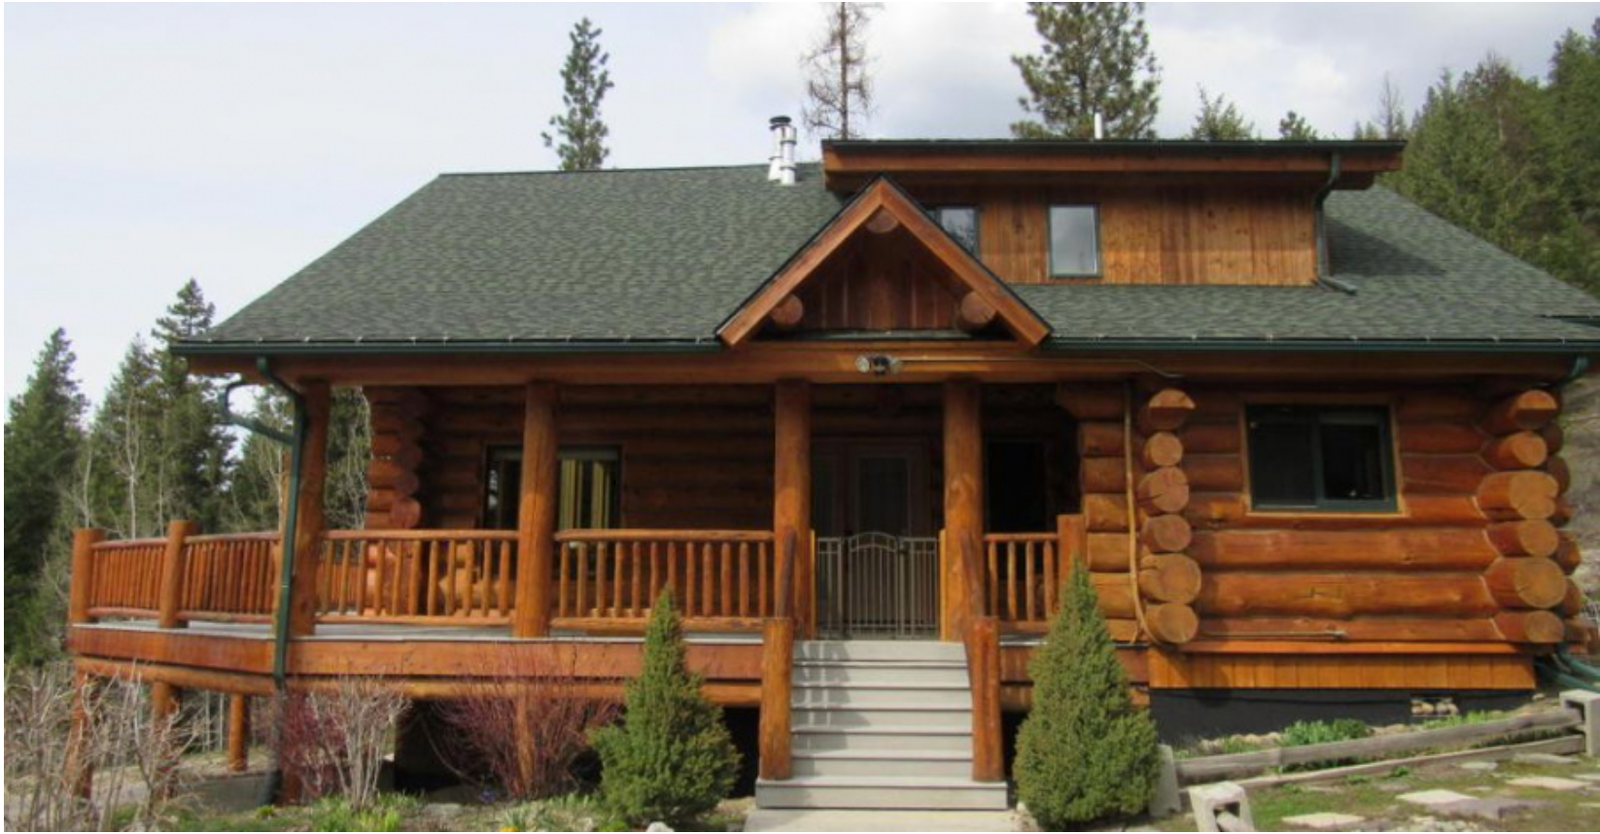 Breathtaking Montana Log Cabin With Twisted Porch For Sale!